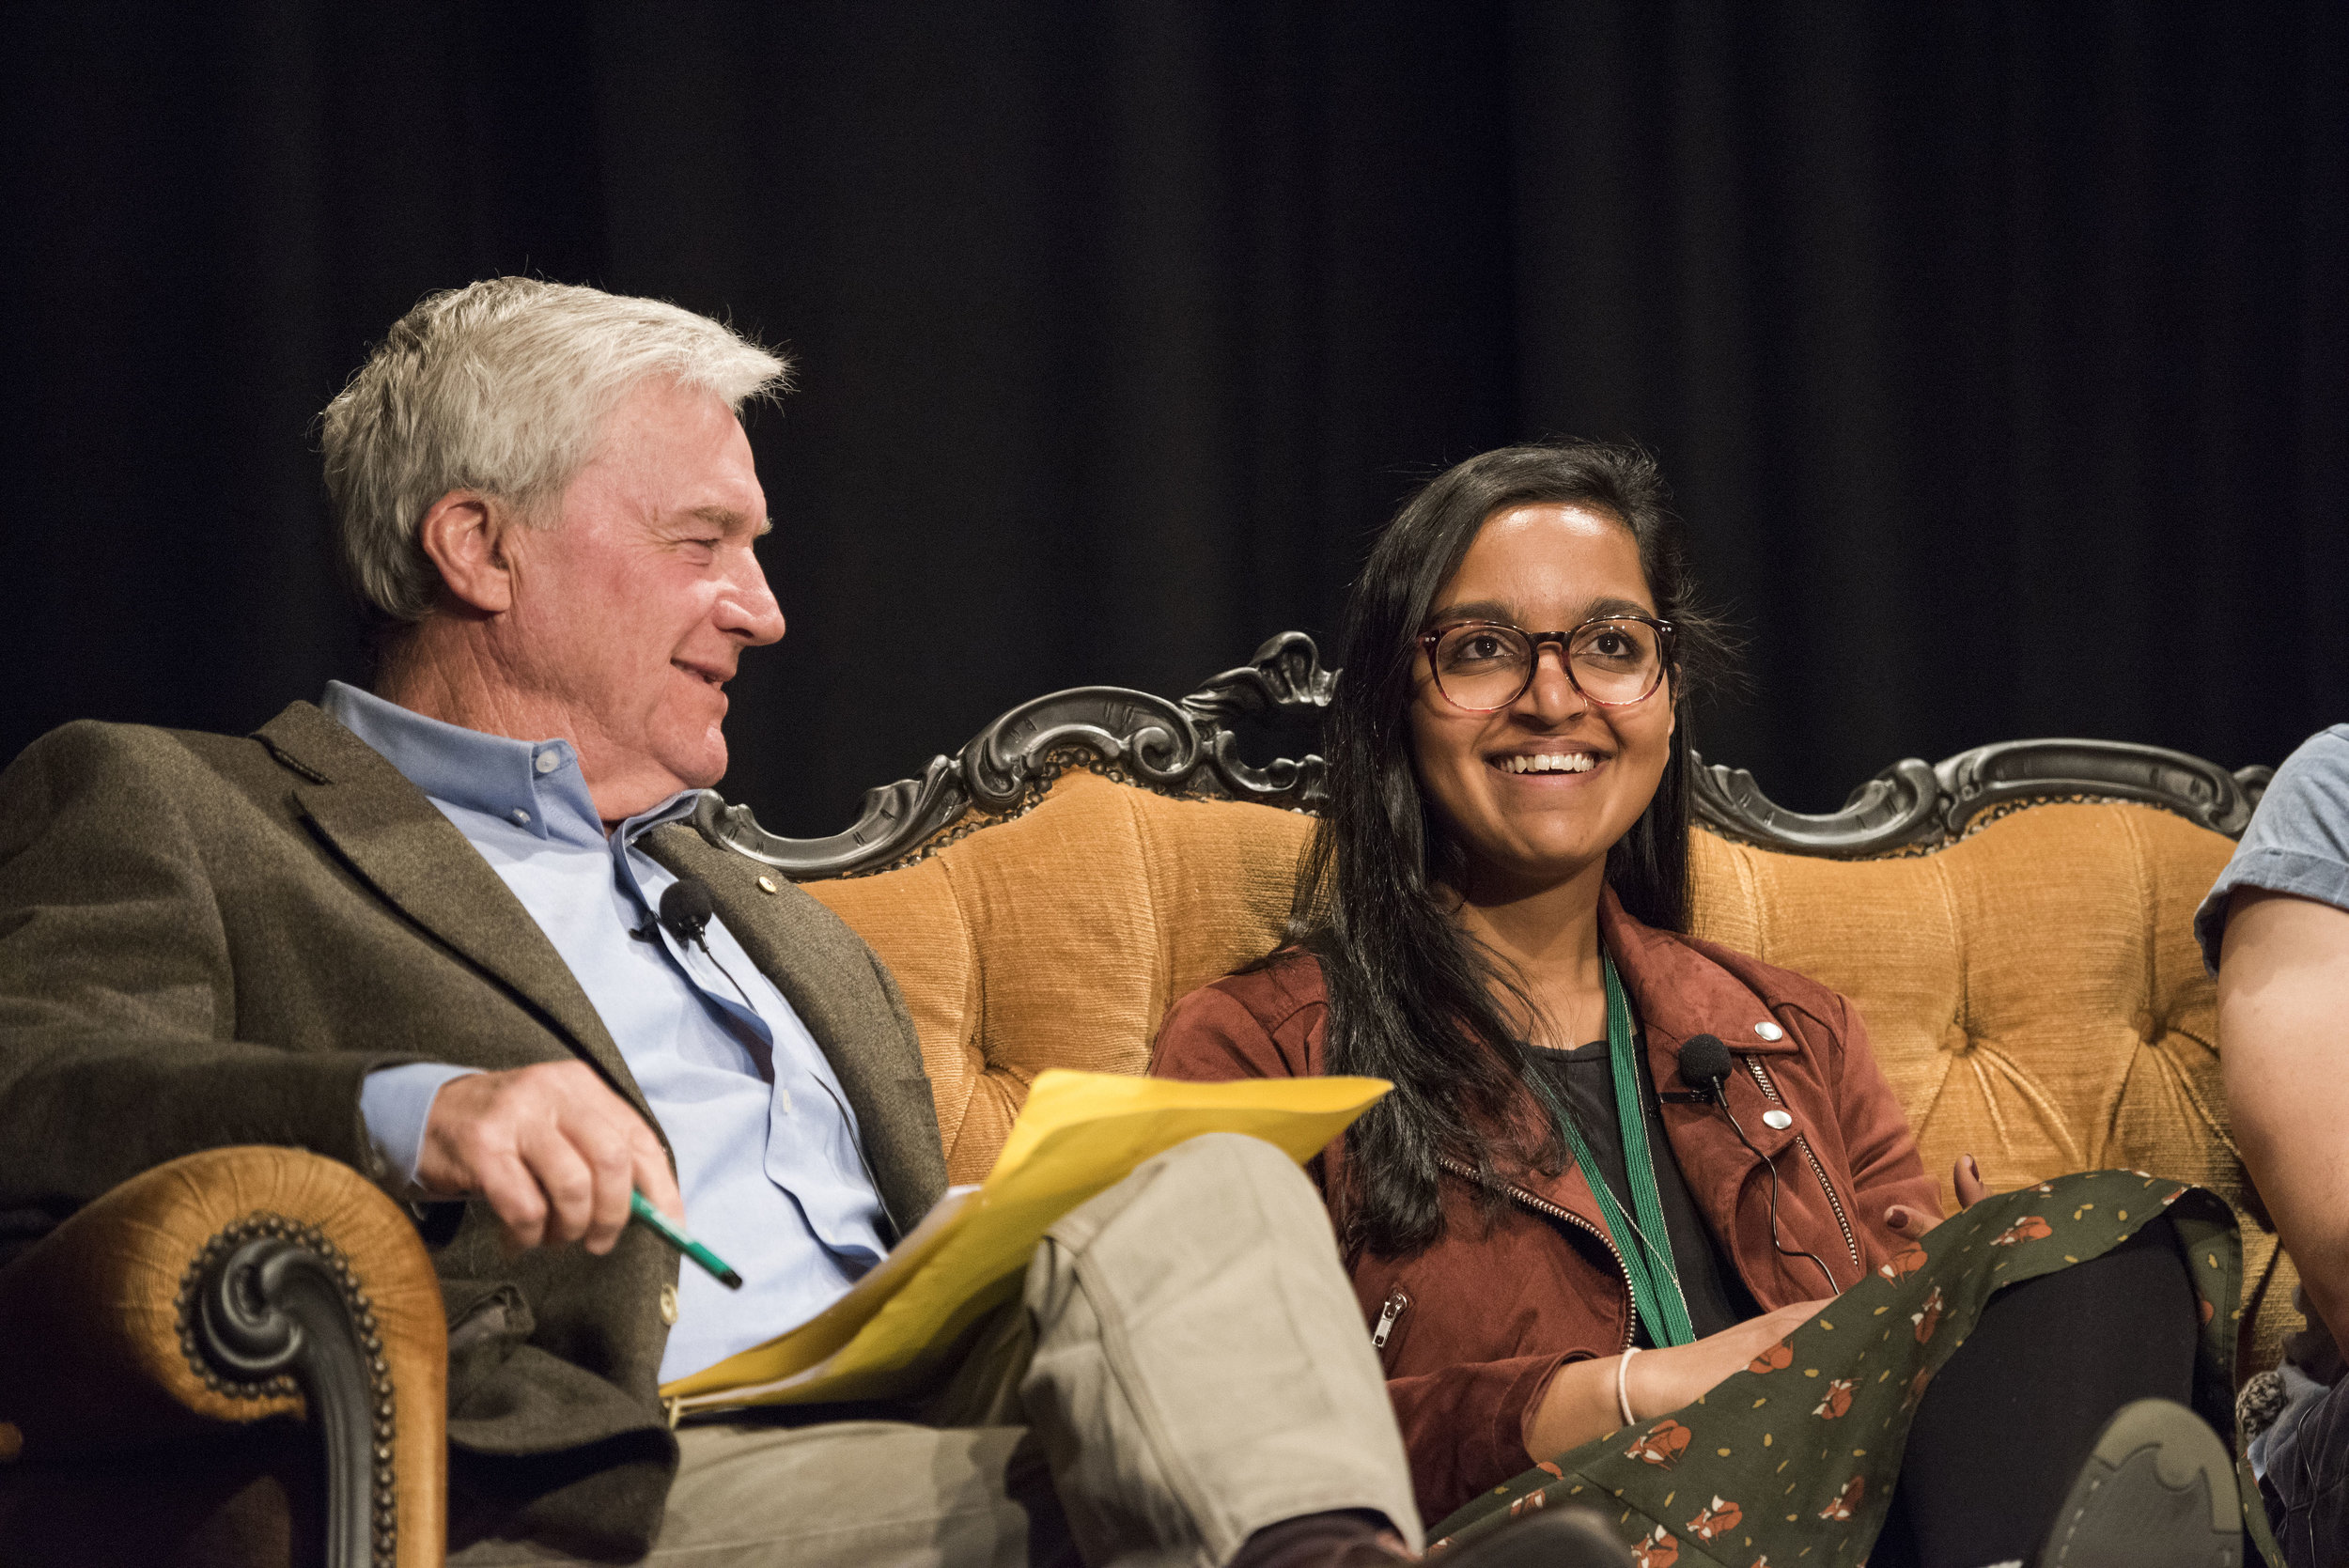 Mike Munro and Zoya Patel in Generation Me or Generation We